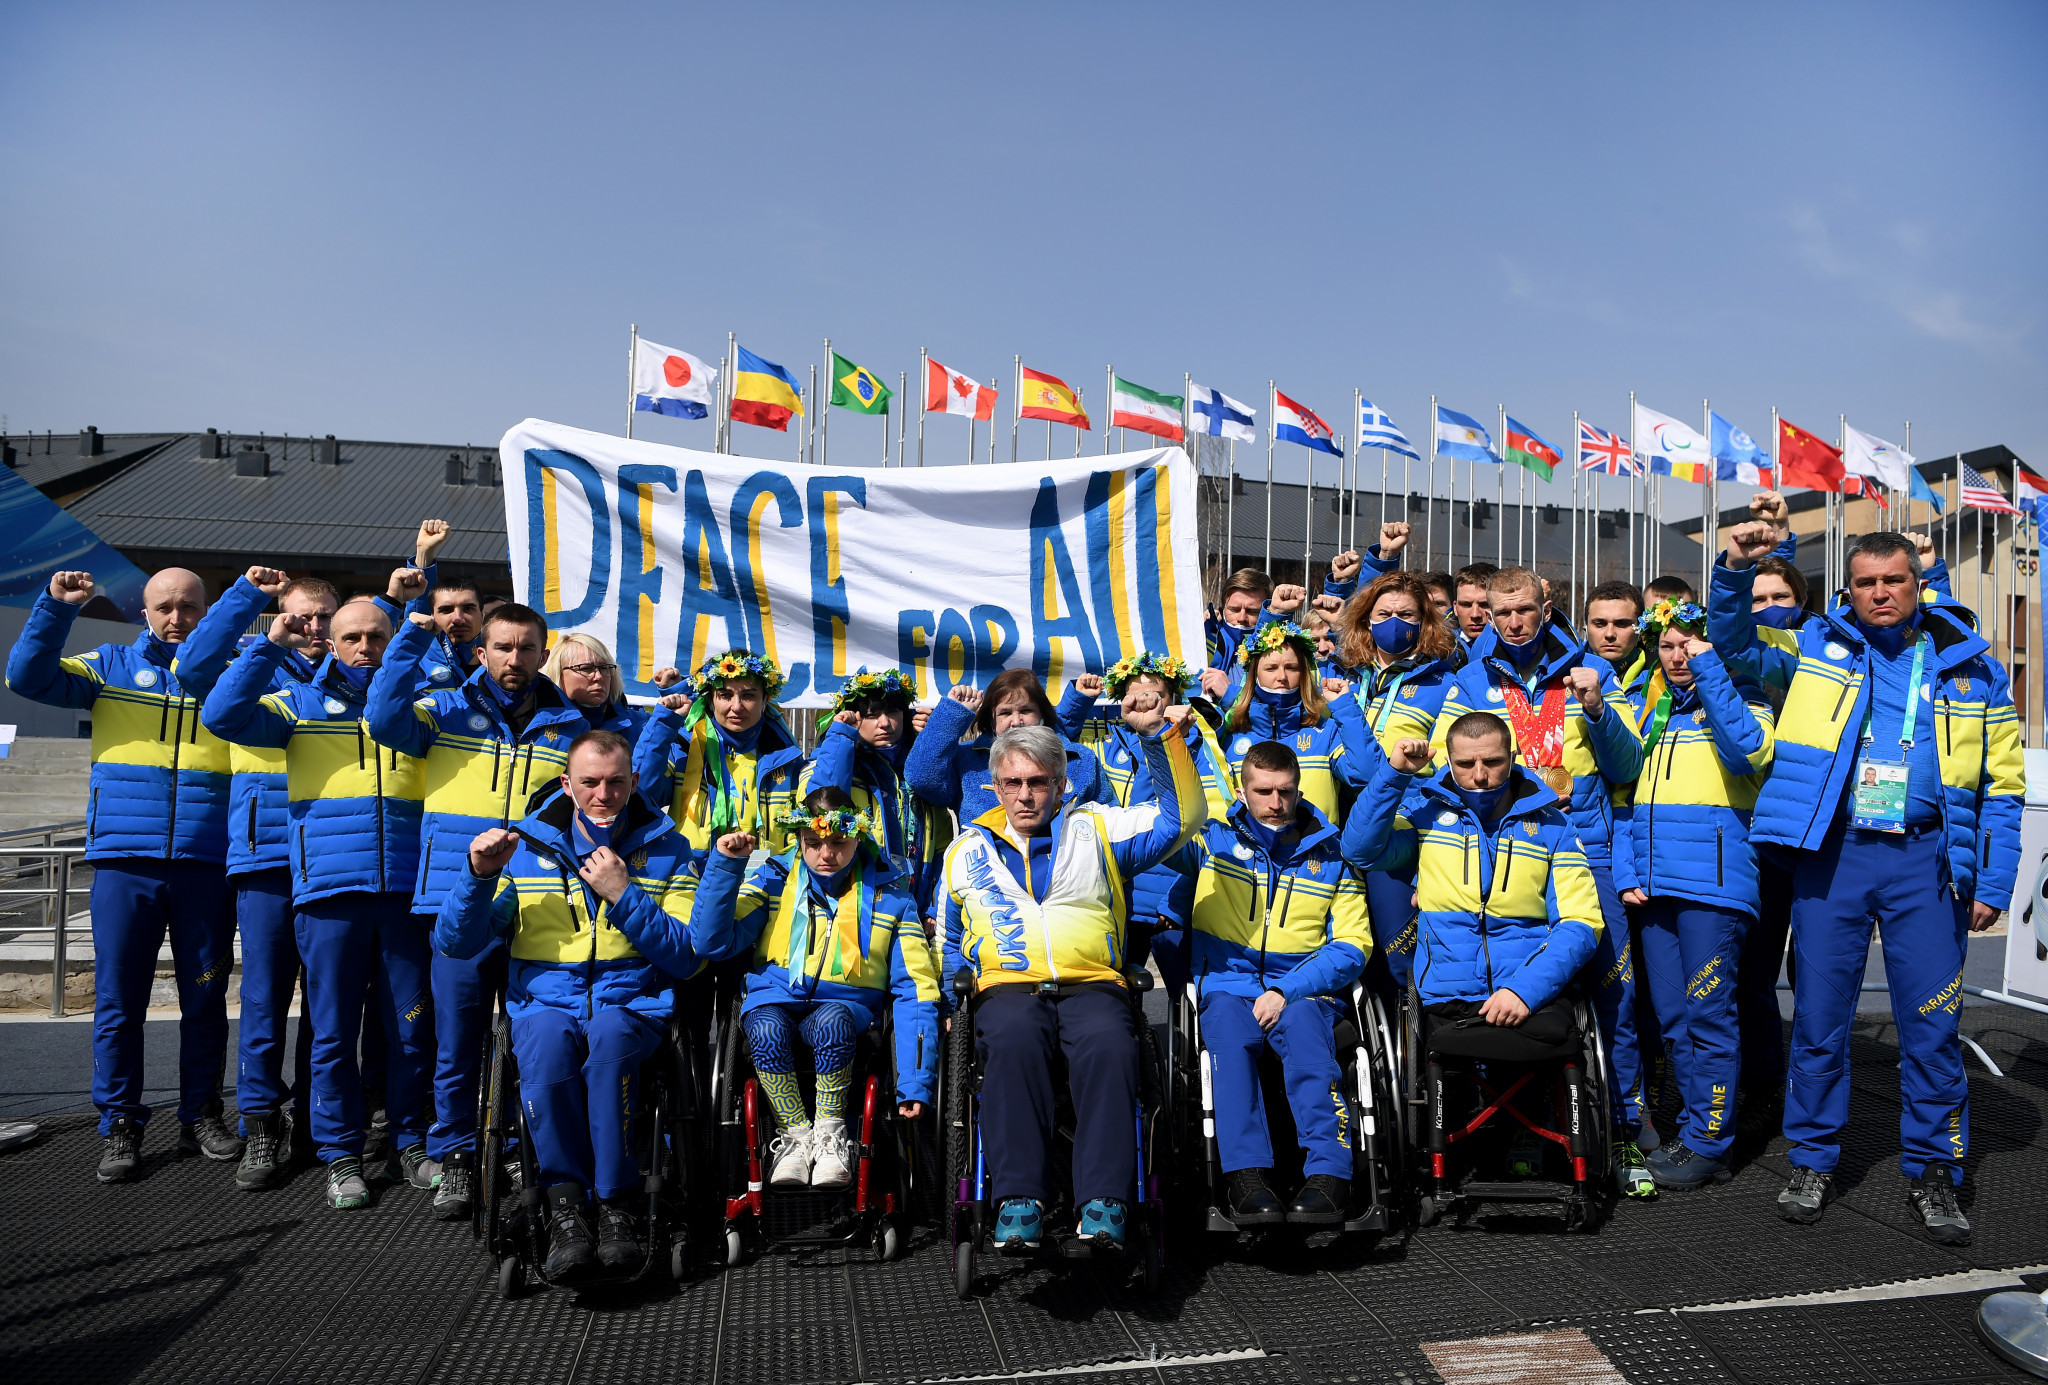 The Ukrainian Paralympic team have made their opposition to the Russian invasion clear ©Getty Images